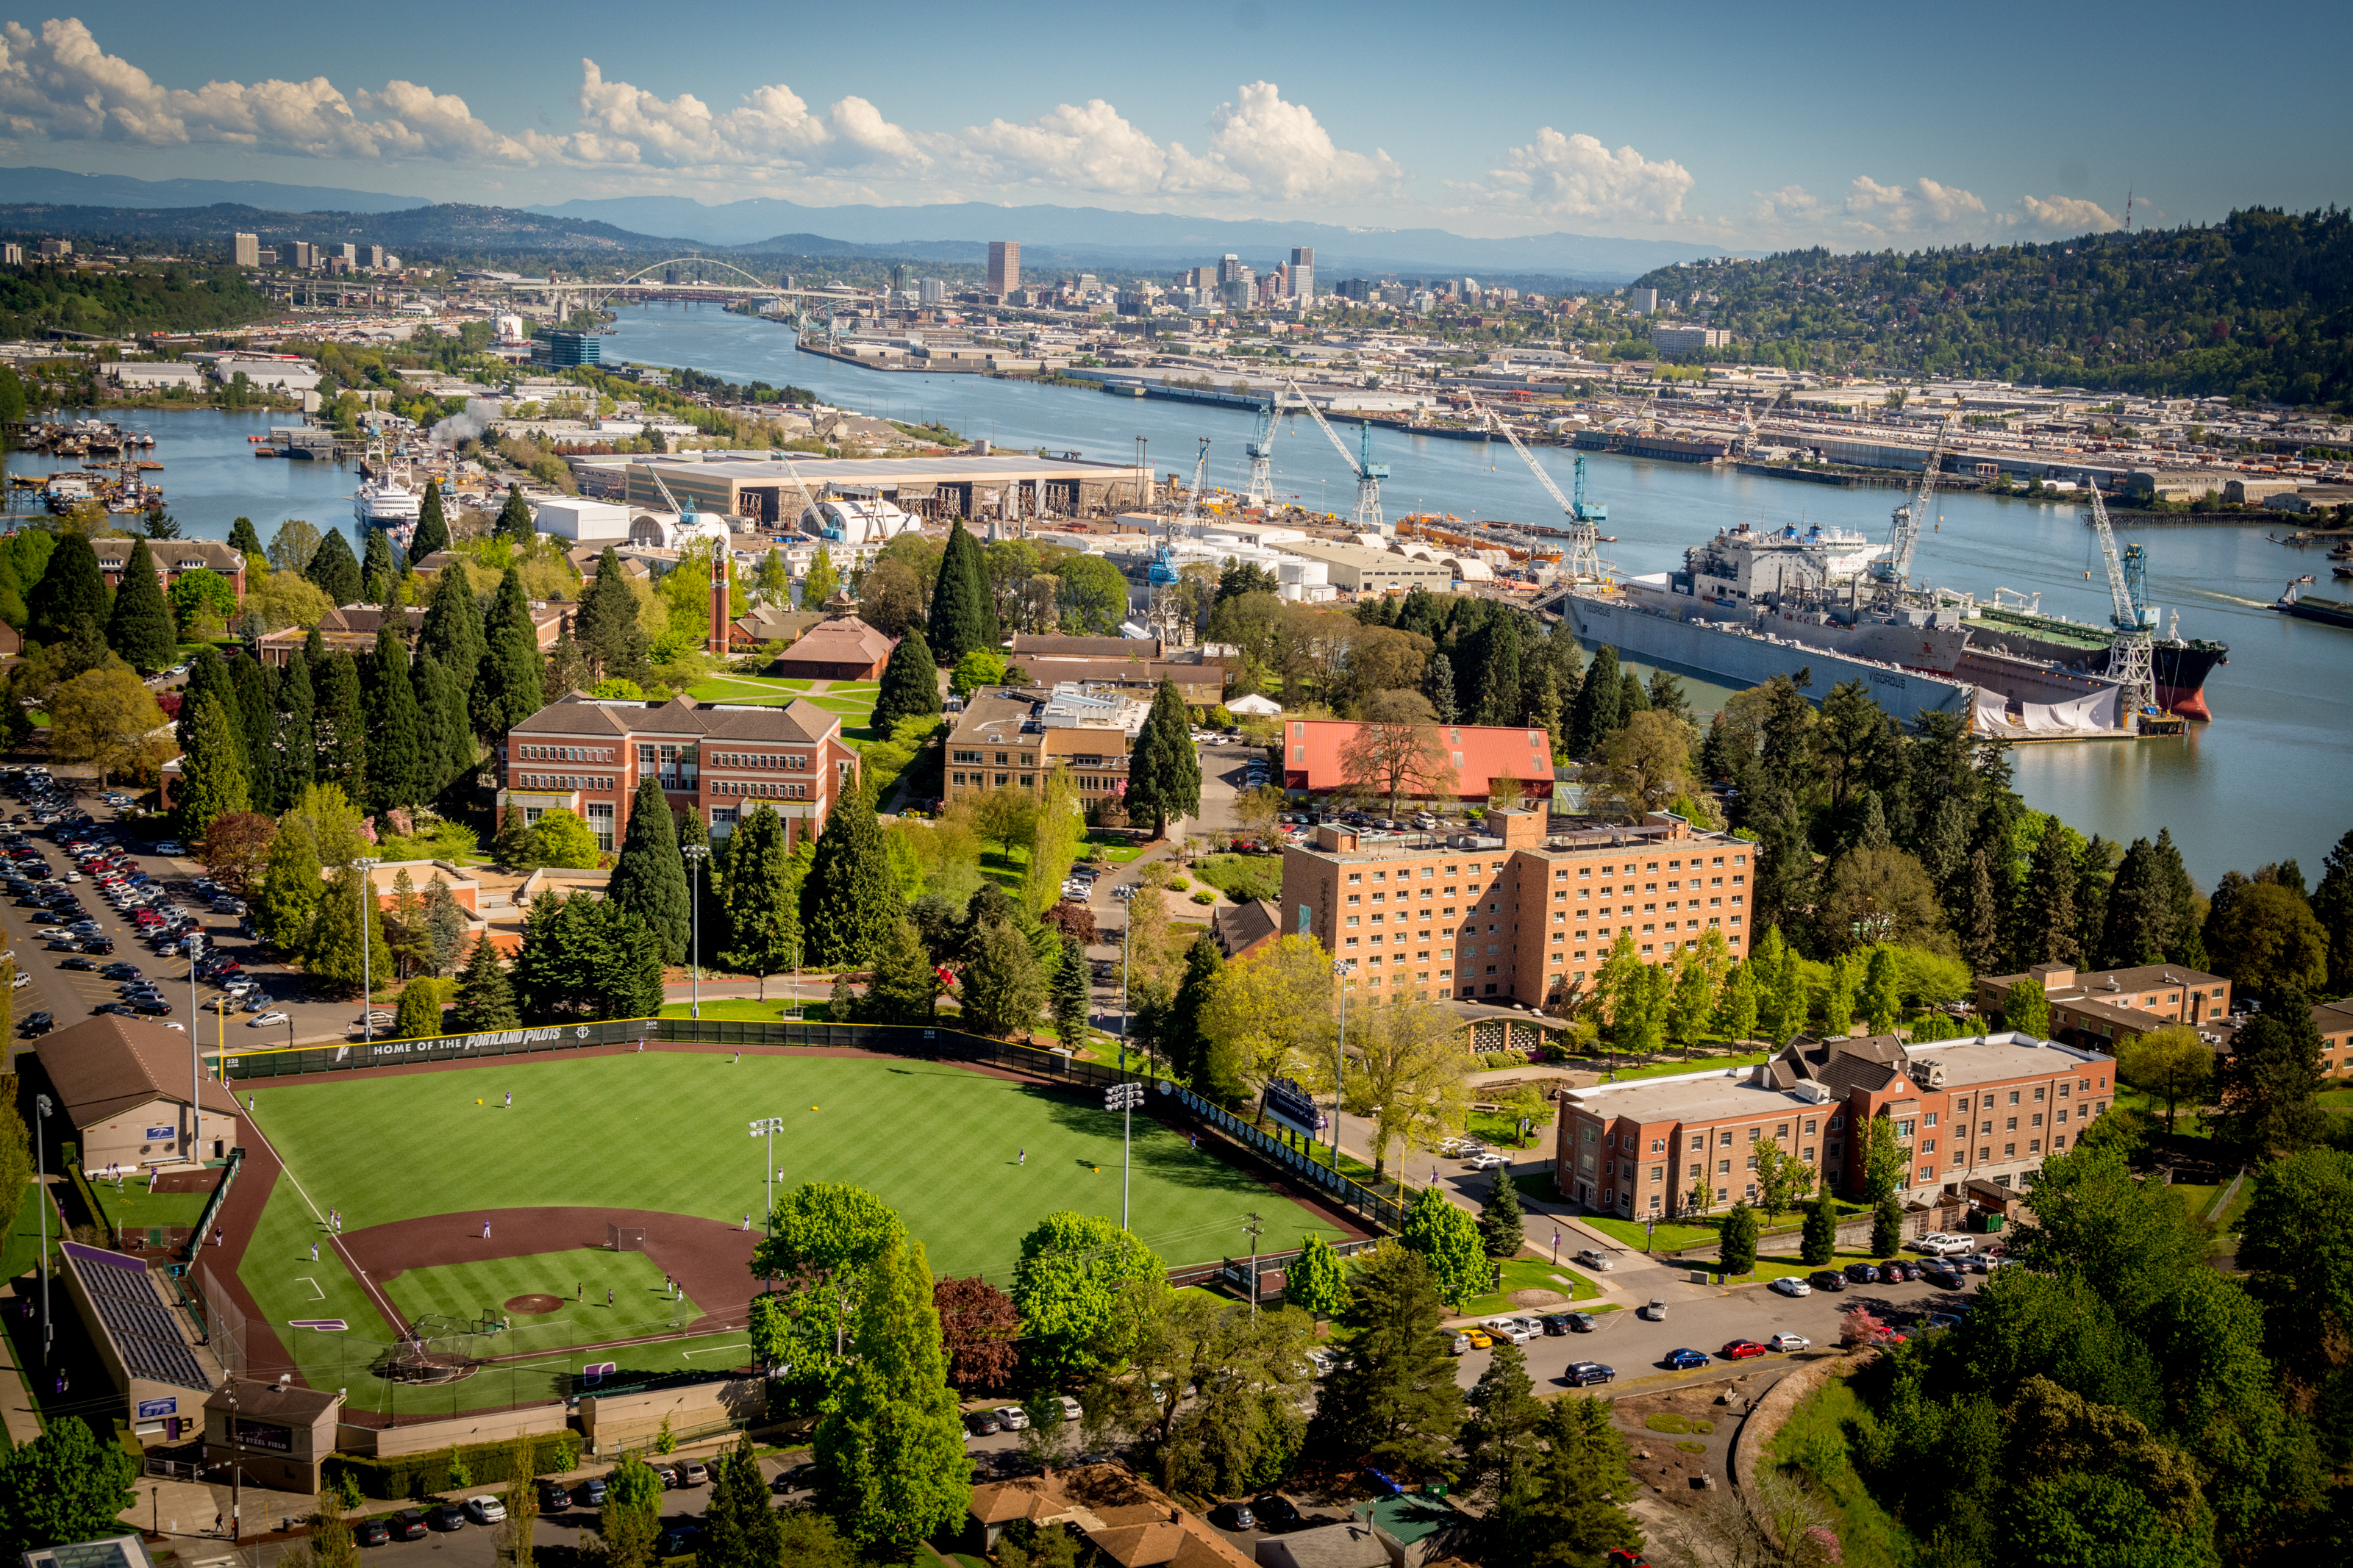 A view of Portland from campus